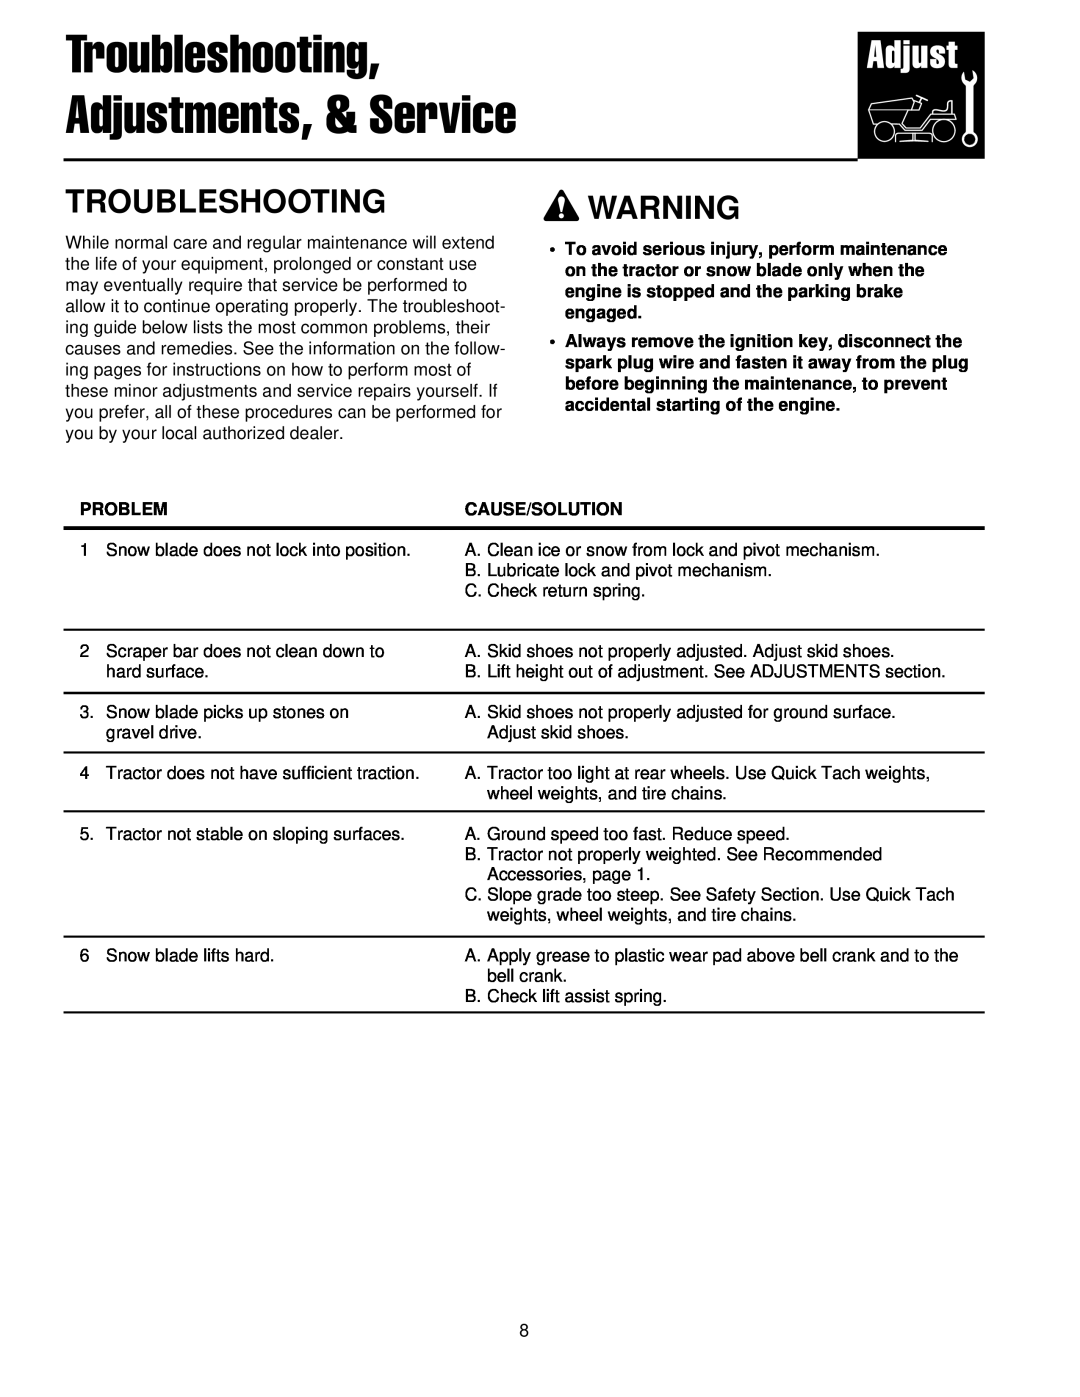 Briggs & Stratton 1694919 manual Troubleshooting Adjustments, & Service, Troubleshooting Warning, Problem, Cause/Solution 